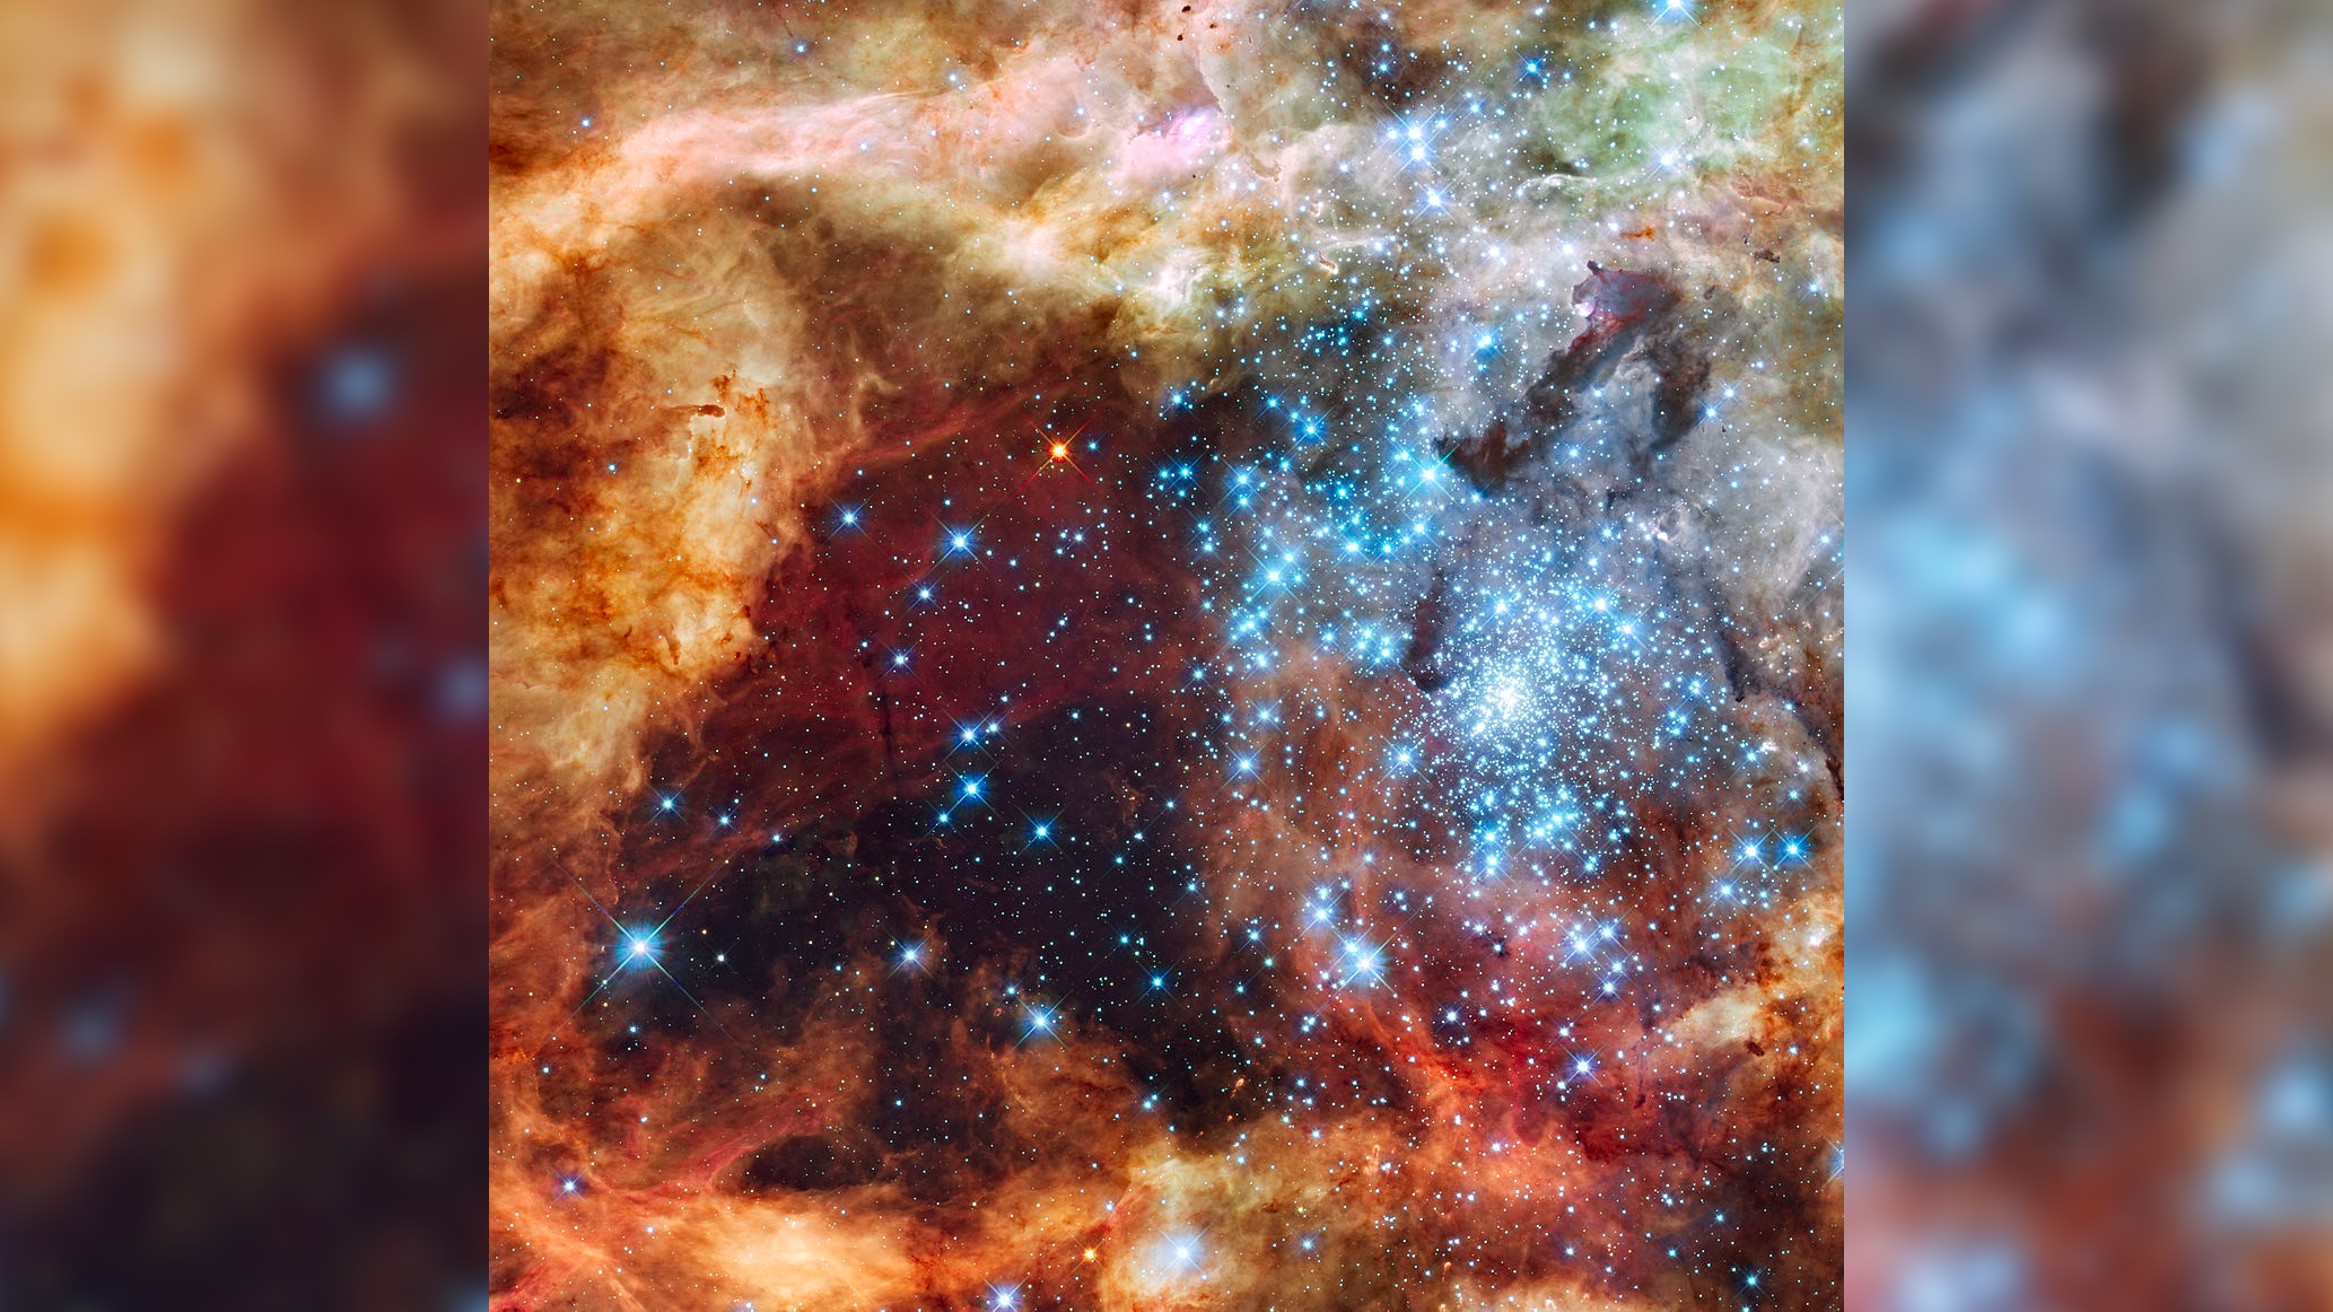 A stellar nursery is filled with clouds of orange and yellow dust. At the center of the image is a mass of bright blue white stars.